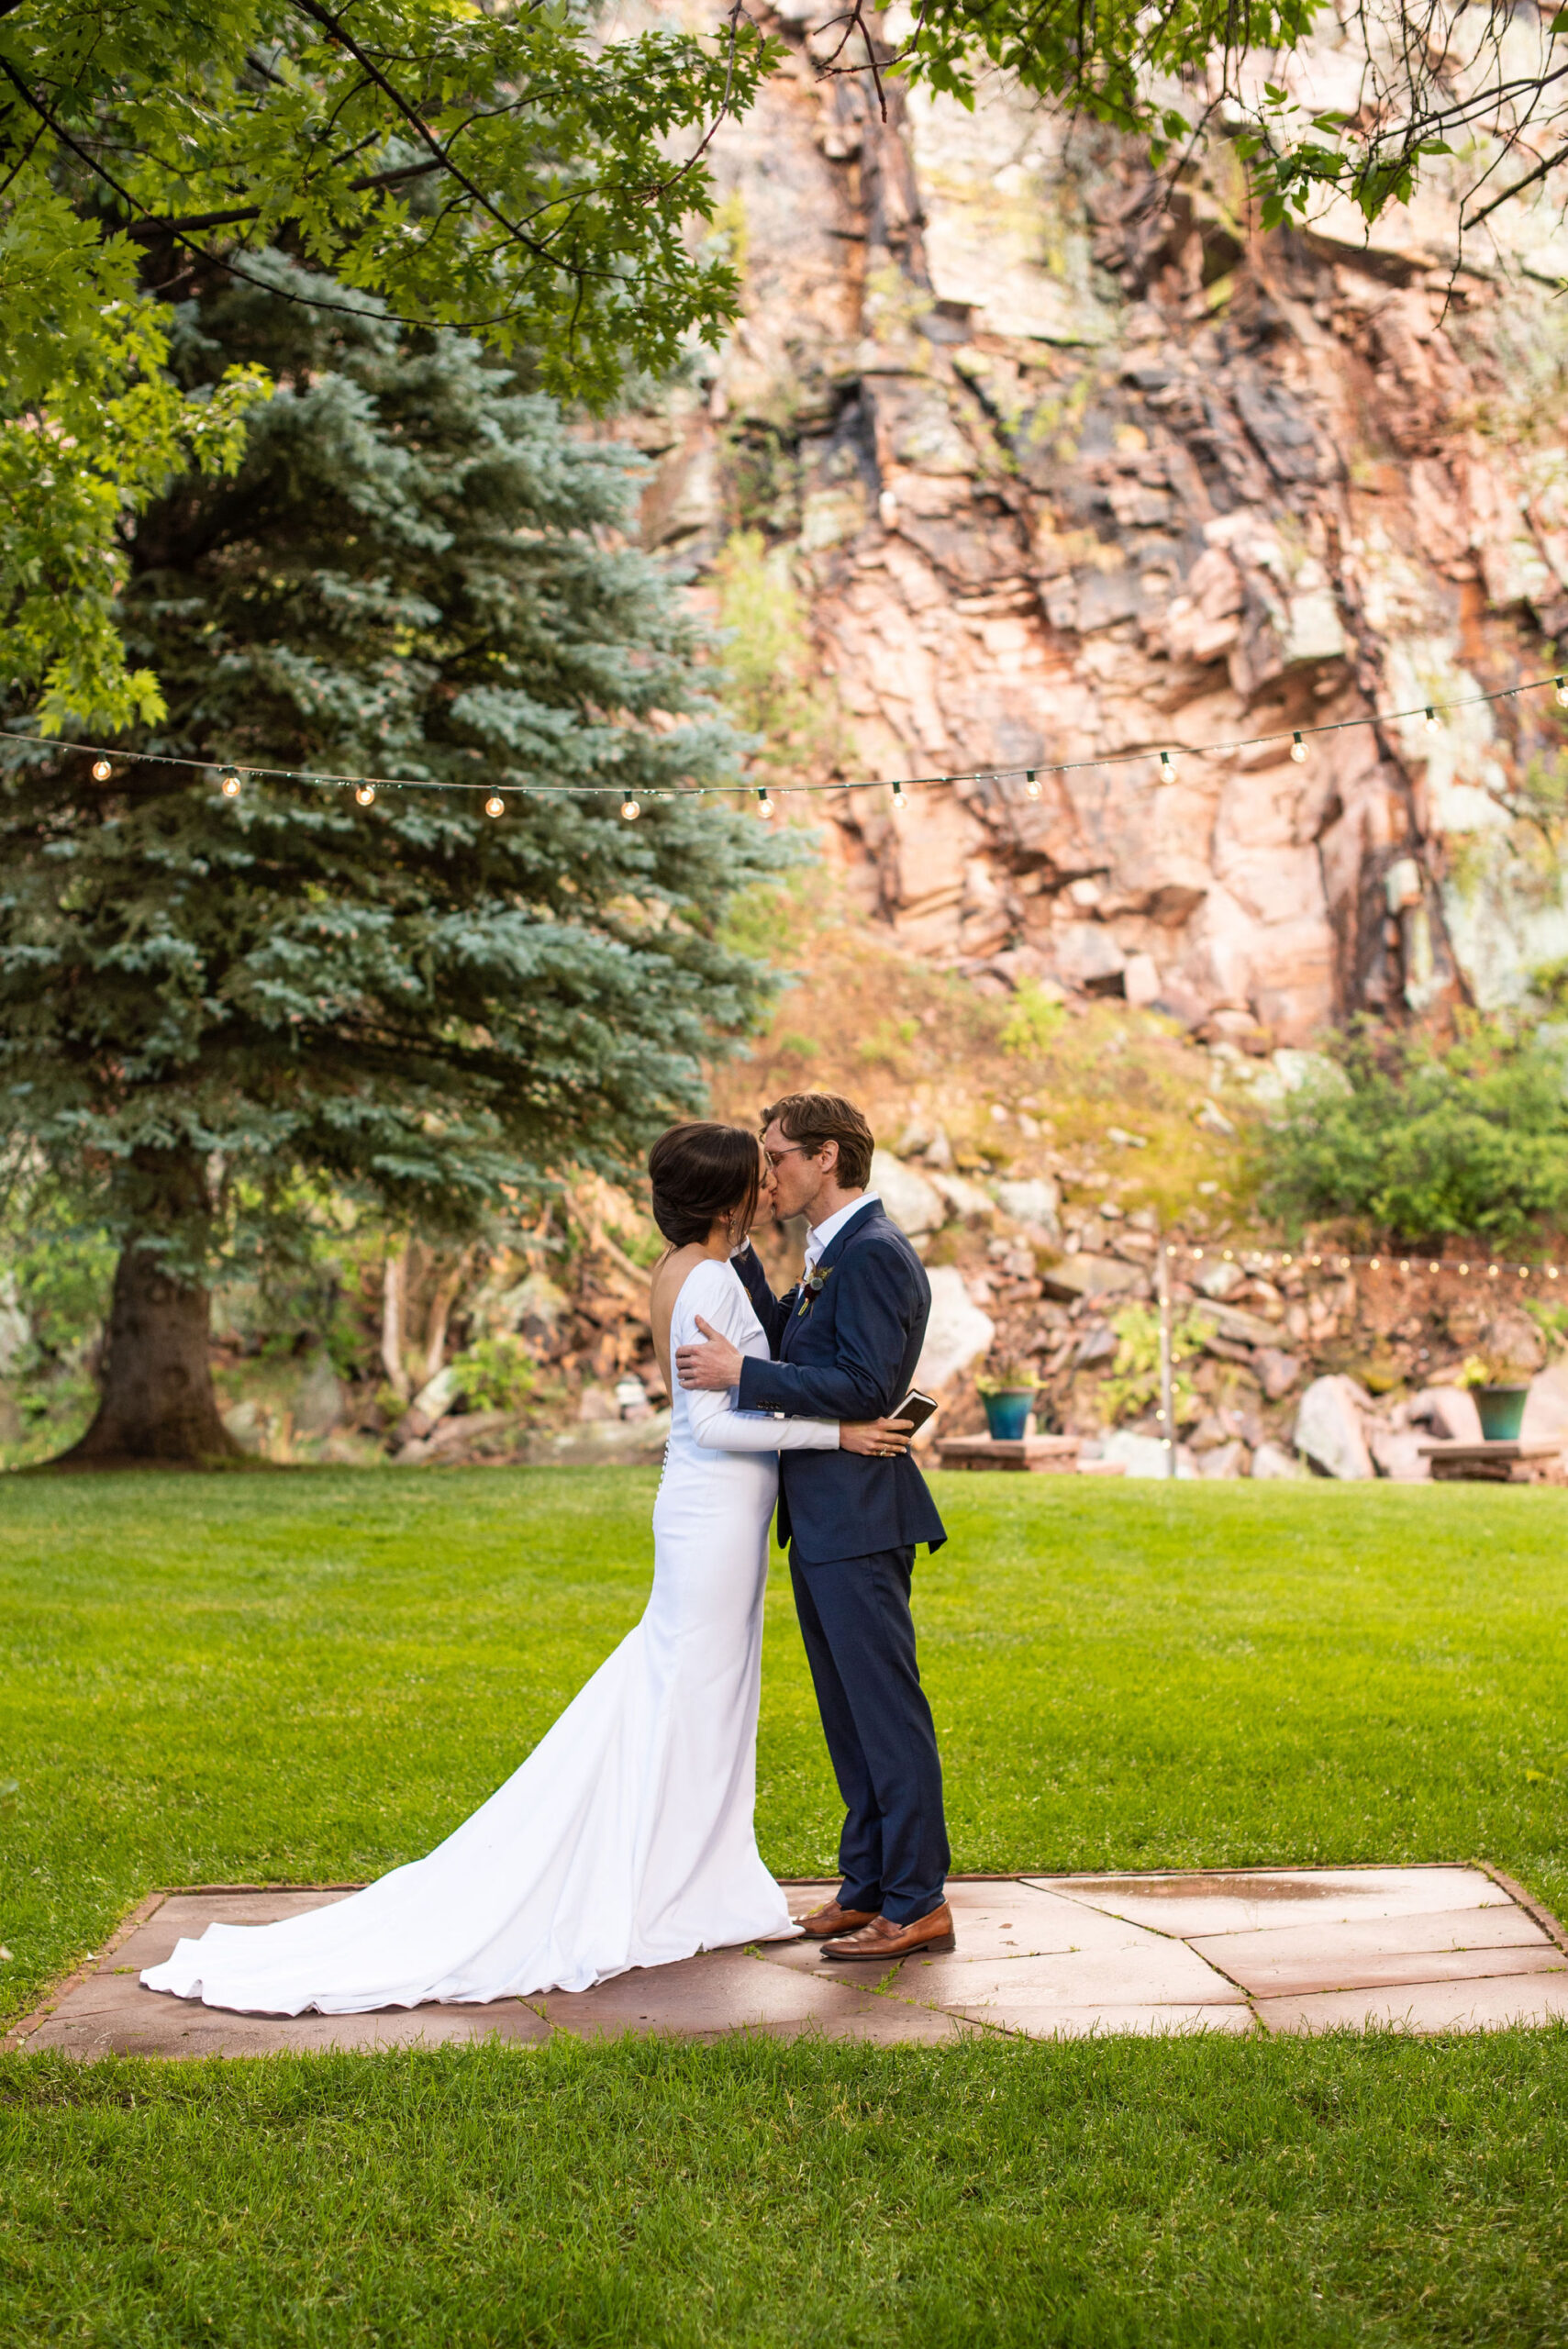 bride and groom kiss during intimate ceremony at colorado wedding venue with guest lodging.